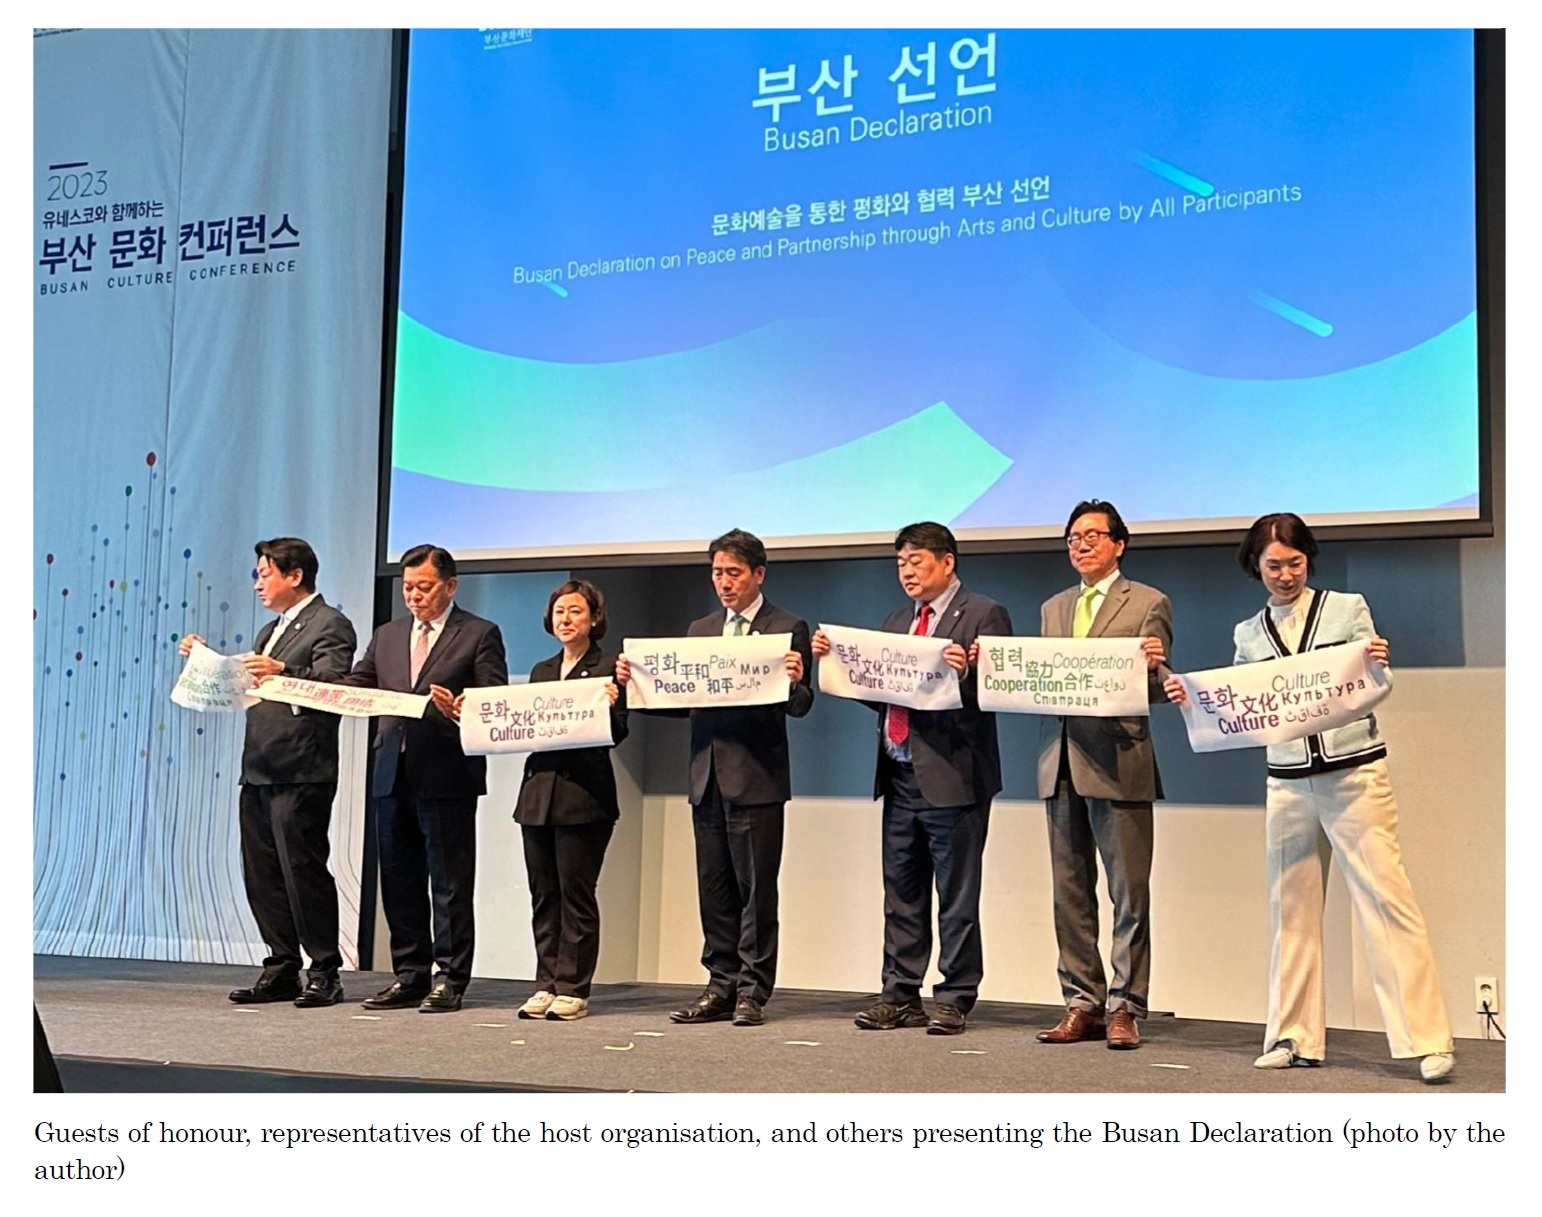 Guests of honour, representatives of the host organisation, and others presenting the Busan Declaration (photo by the author)